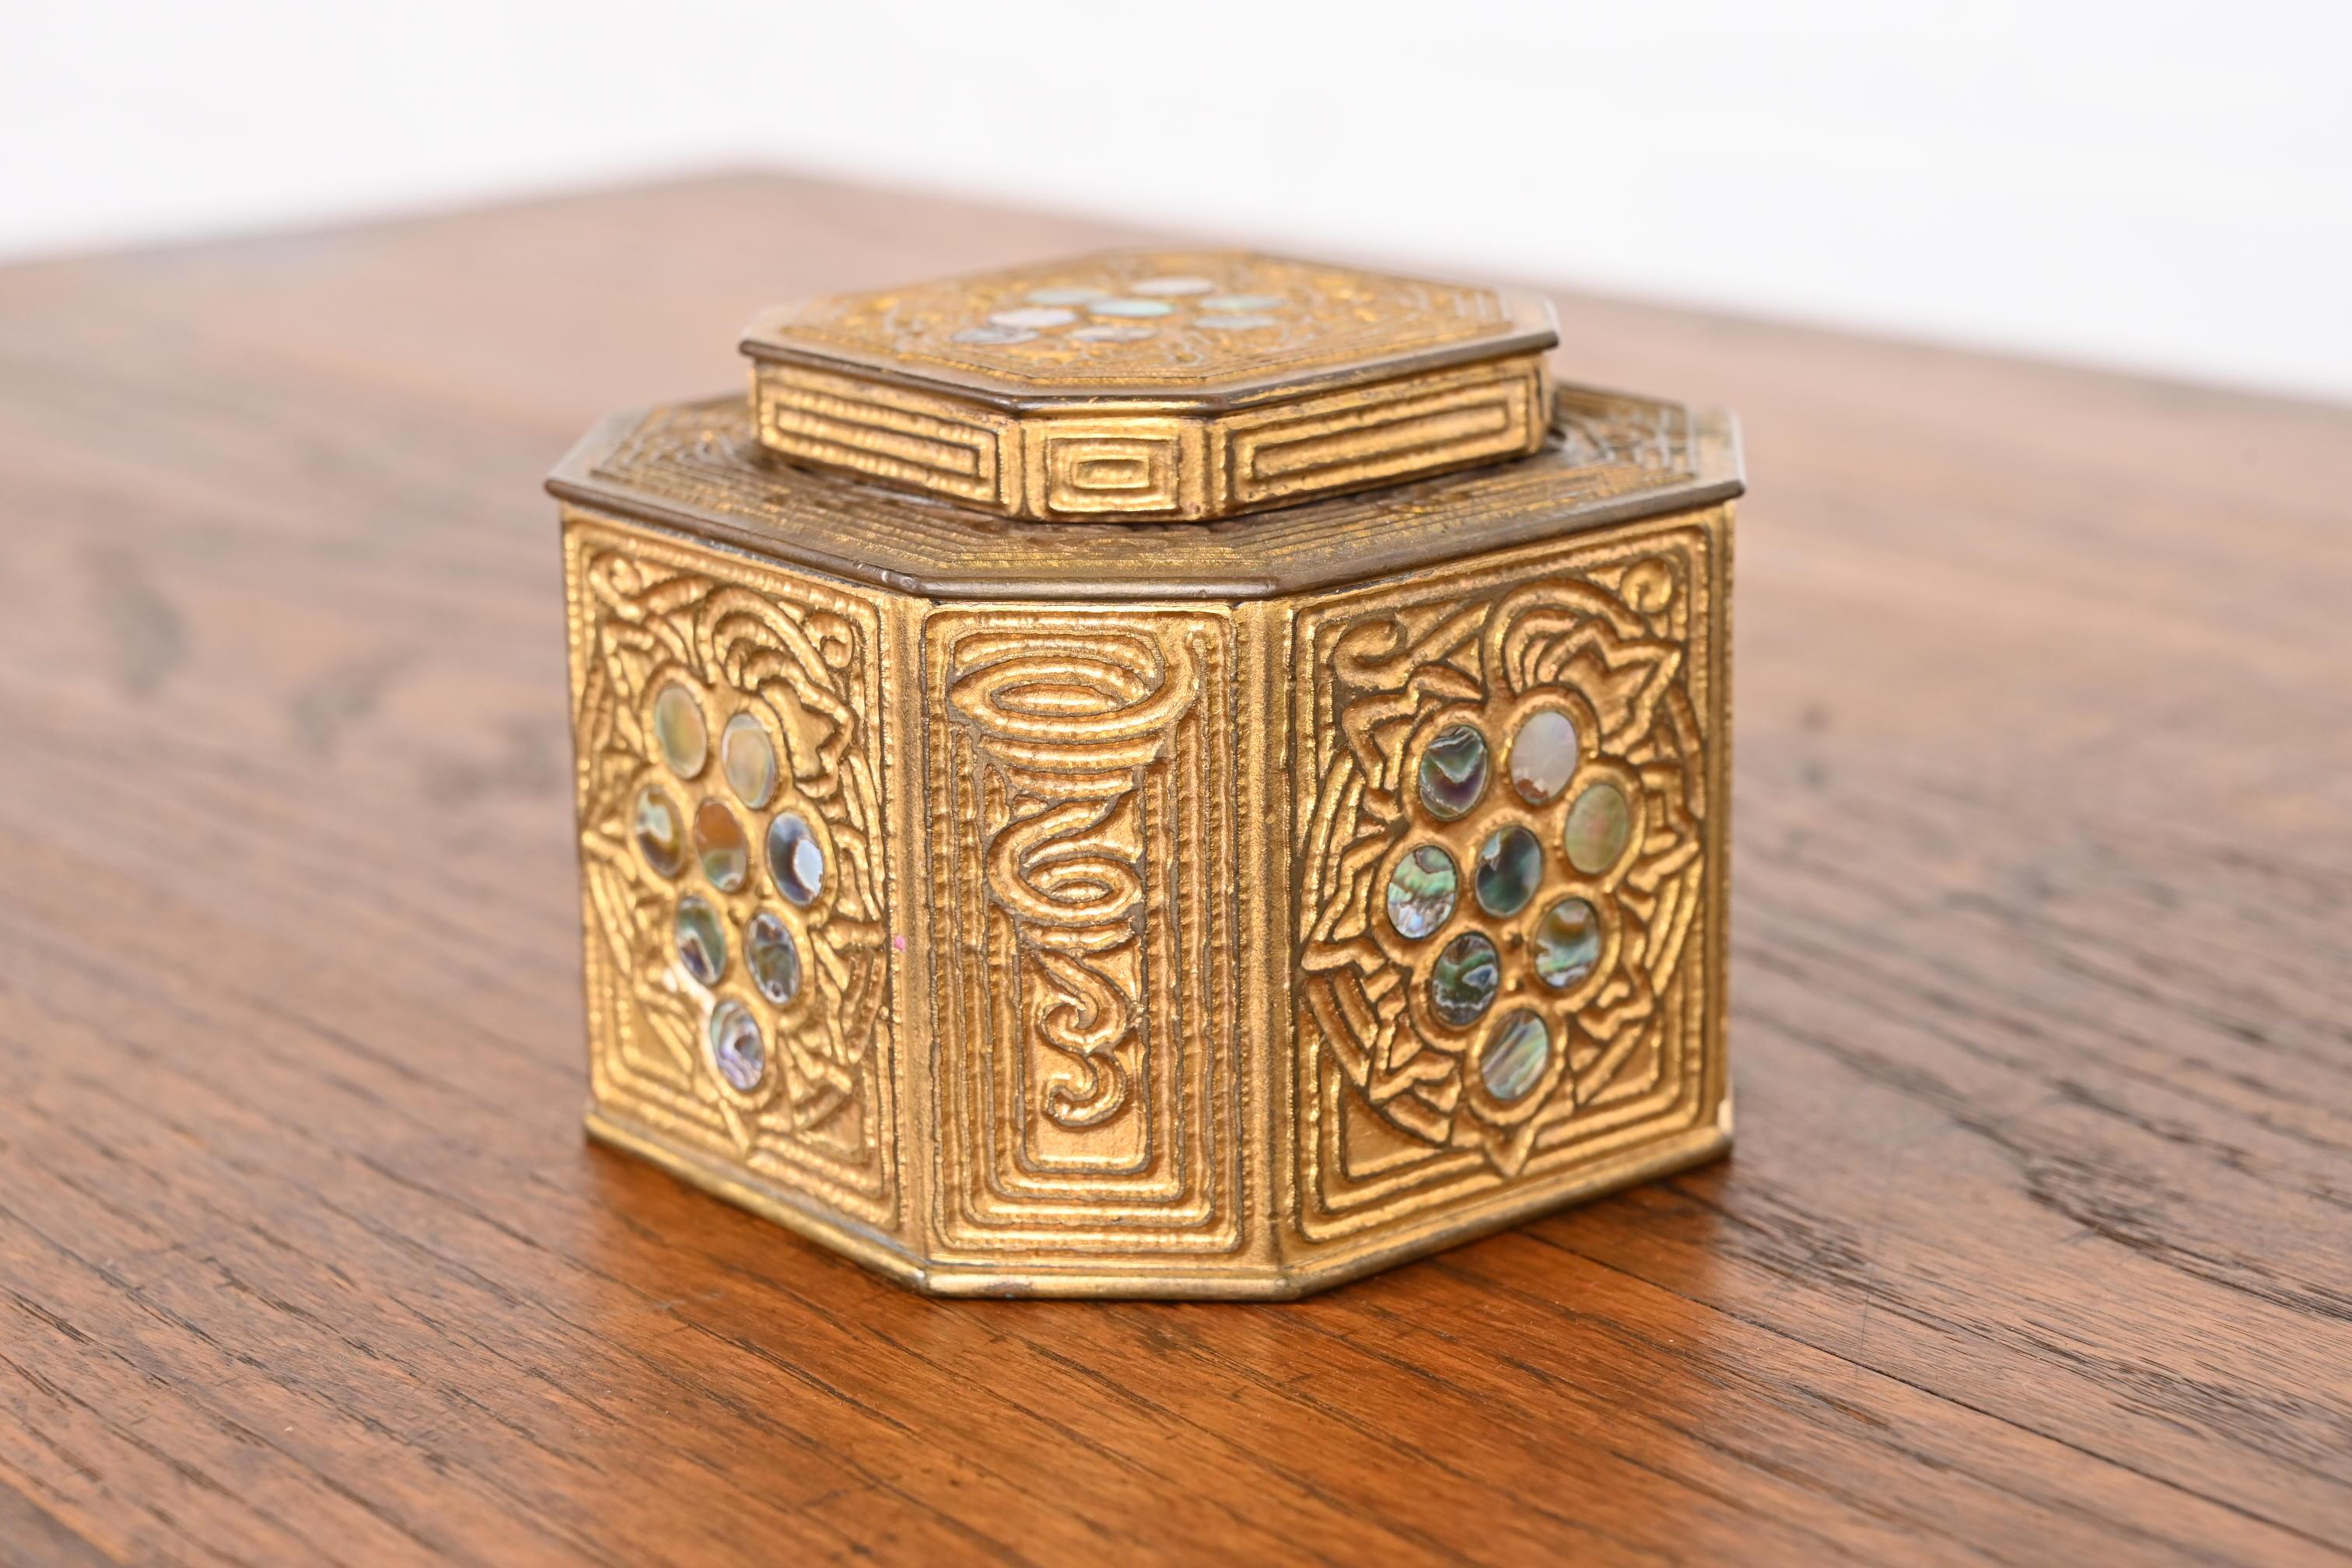 A gorgeous Art Nouveau period gilt bronze and inlaid abalone inkwell

By Tiffany Studios

New York, USA, early 20th century

Measures: 3.63